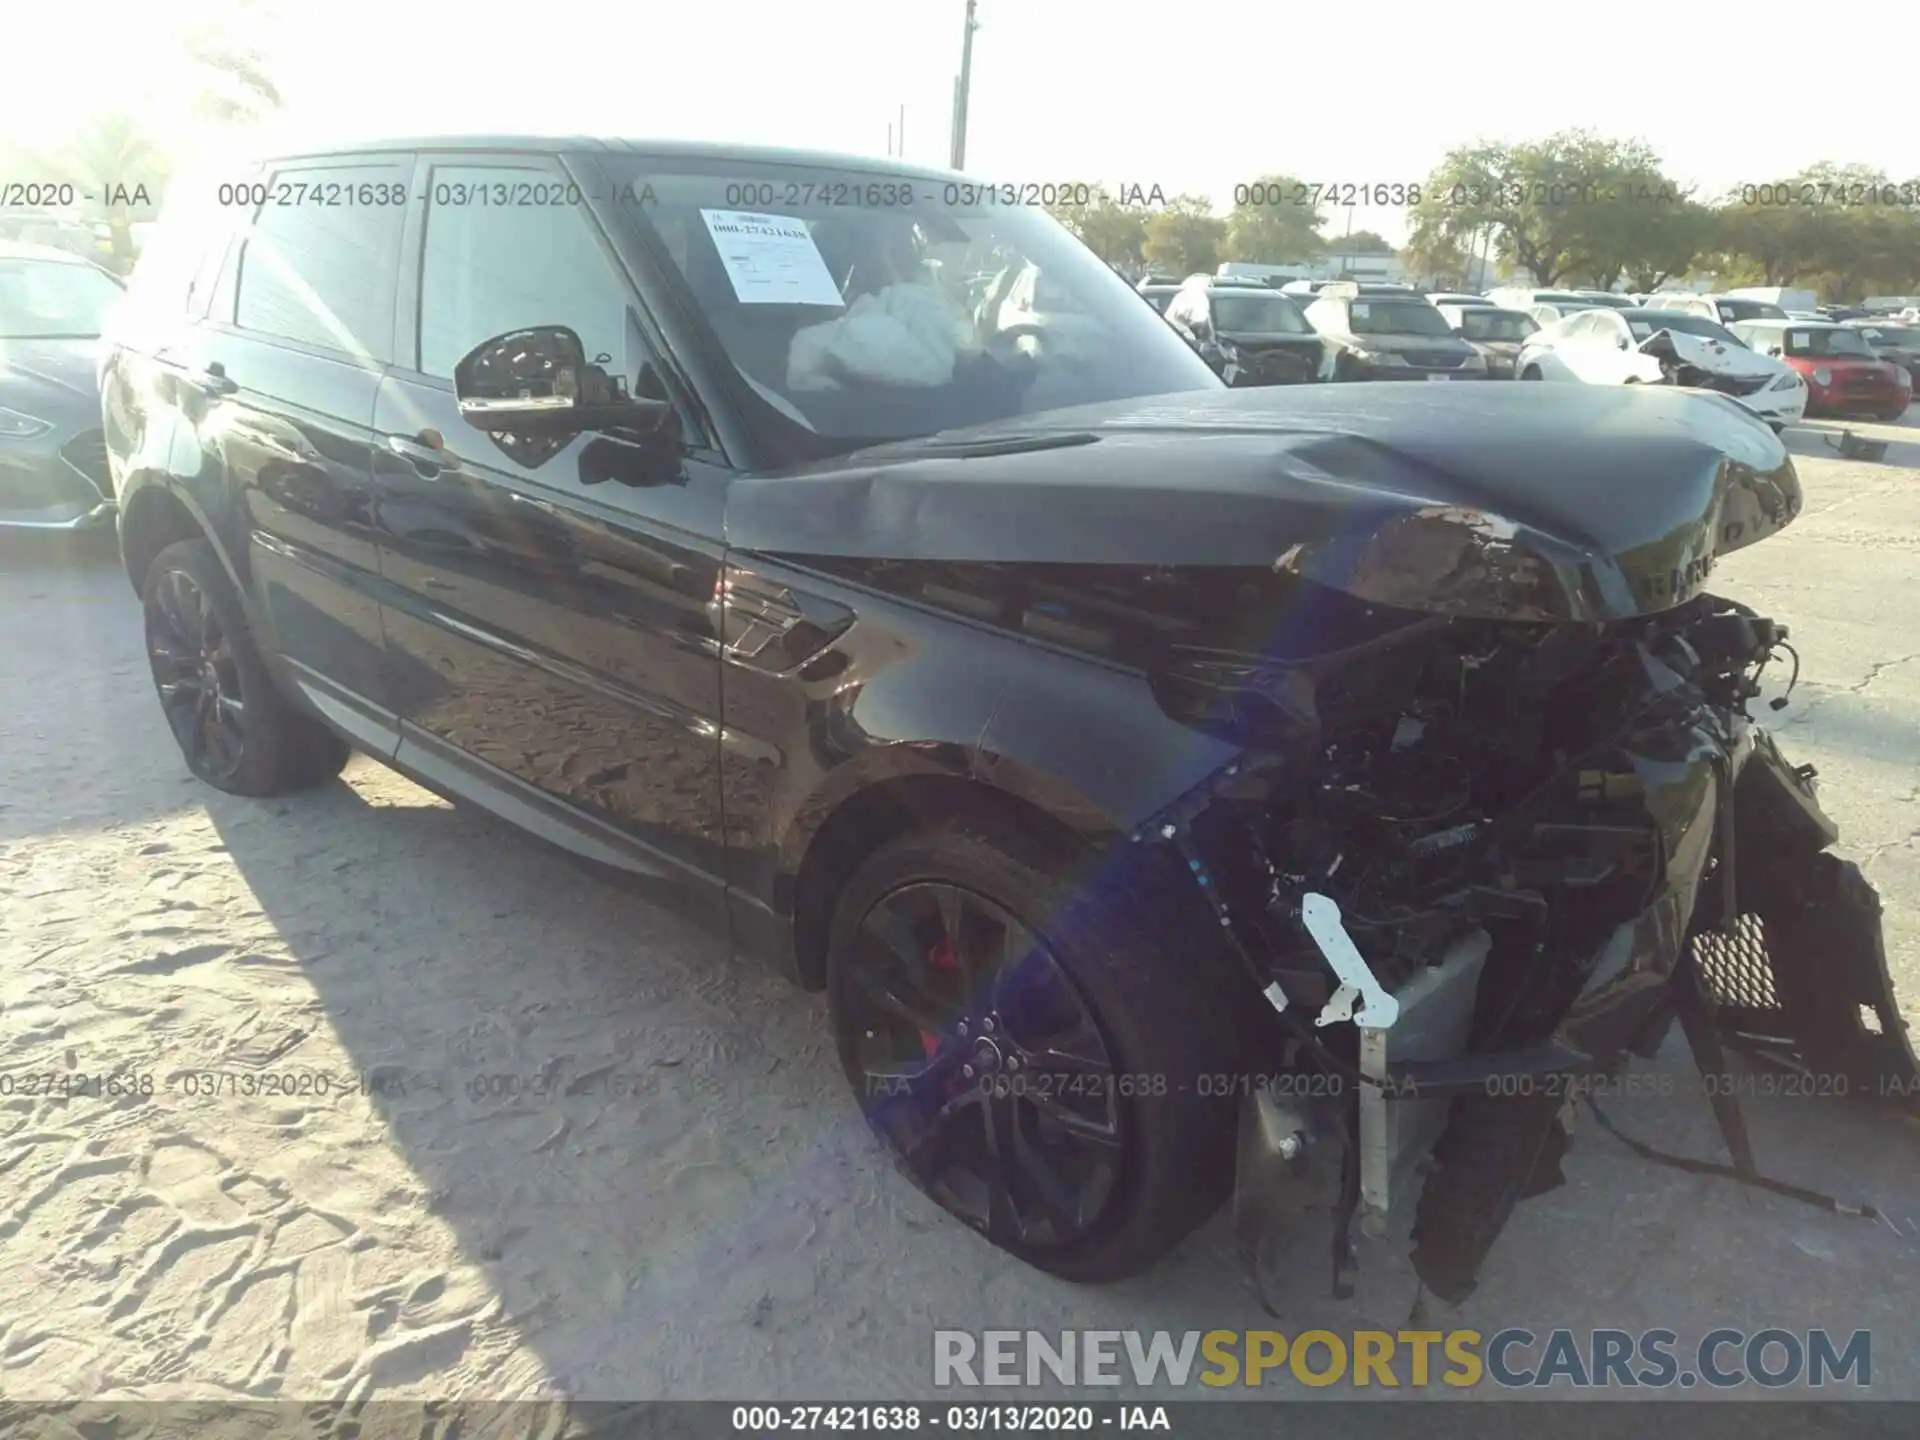 1 Photograph of a damaged car SALWG2RVXKA423559 LAND ROVER RANGE ROVER SPORT 2019